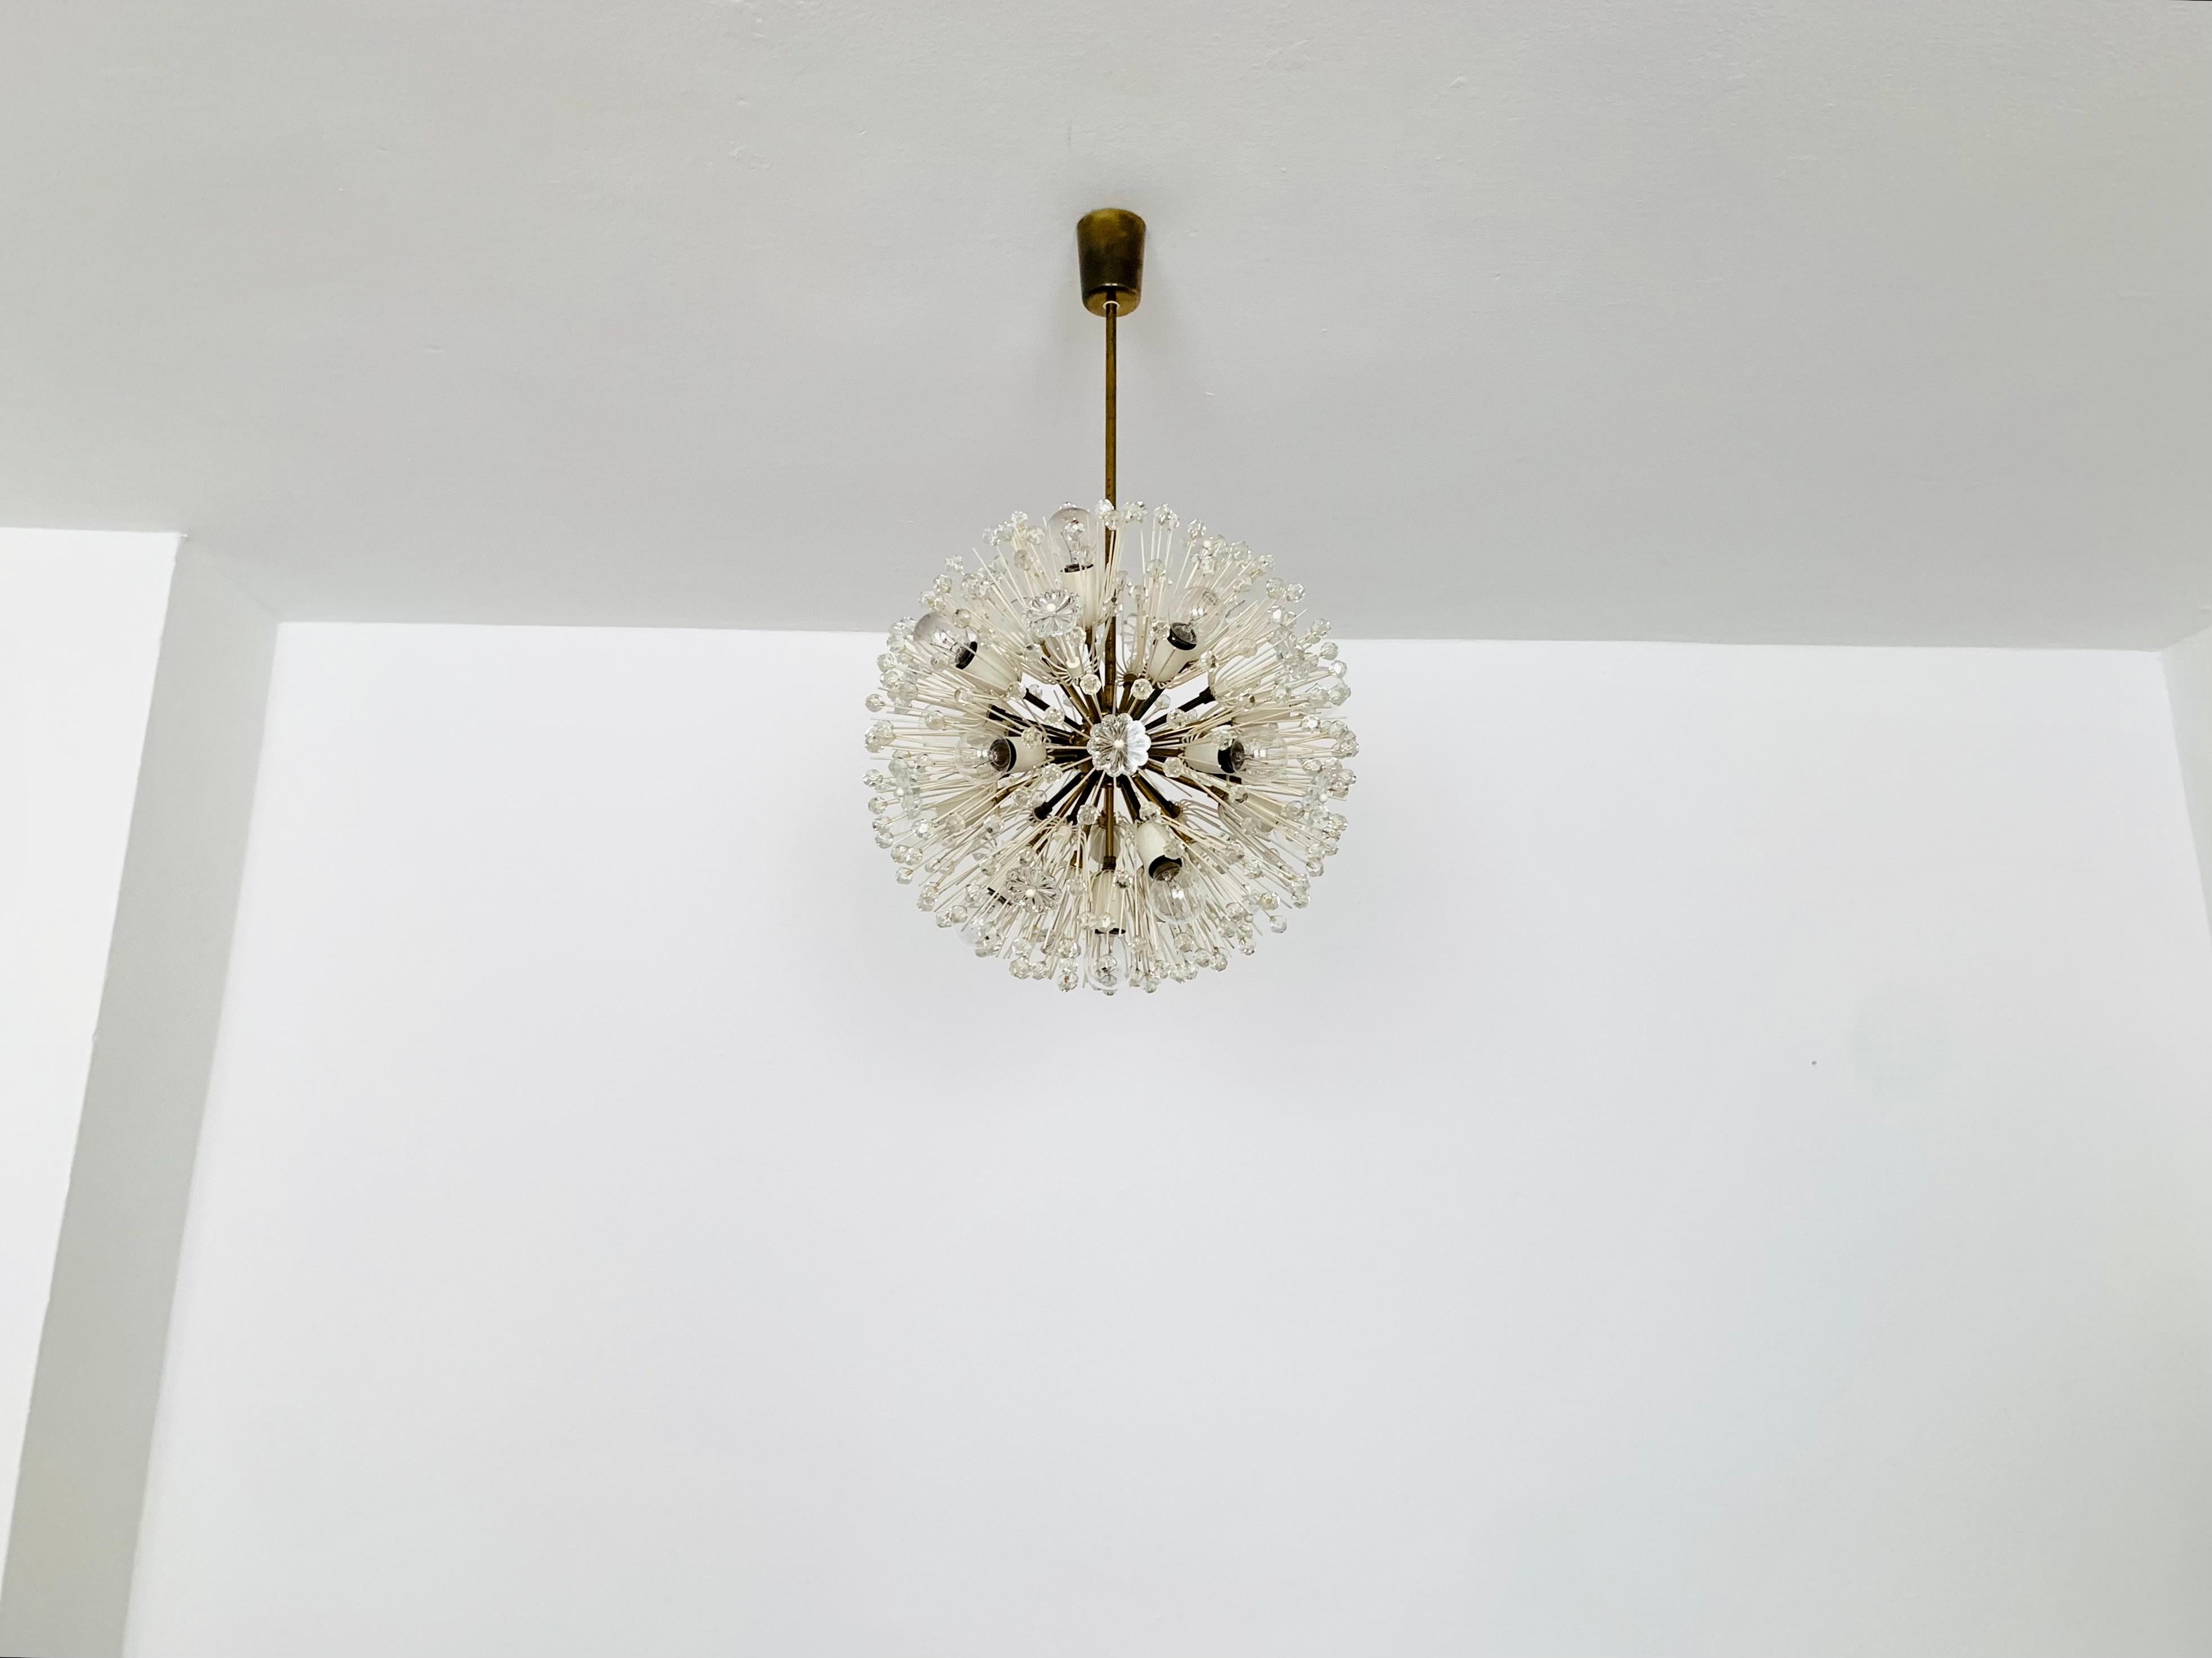 Wonderful chandelier from the 1950s.
The lamp with its lavishly decorated flowers and brass details has a very luxurious look and sparkles particularly beautifully.
The design and the materials used create a great glittering light.
A stunning